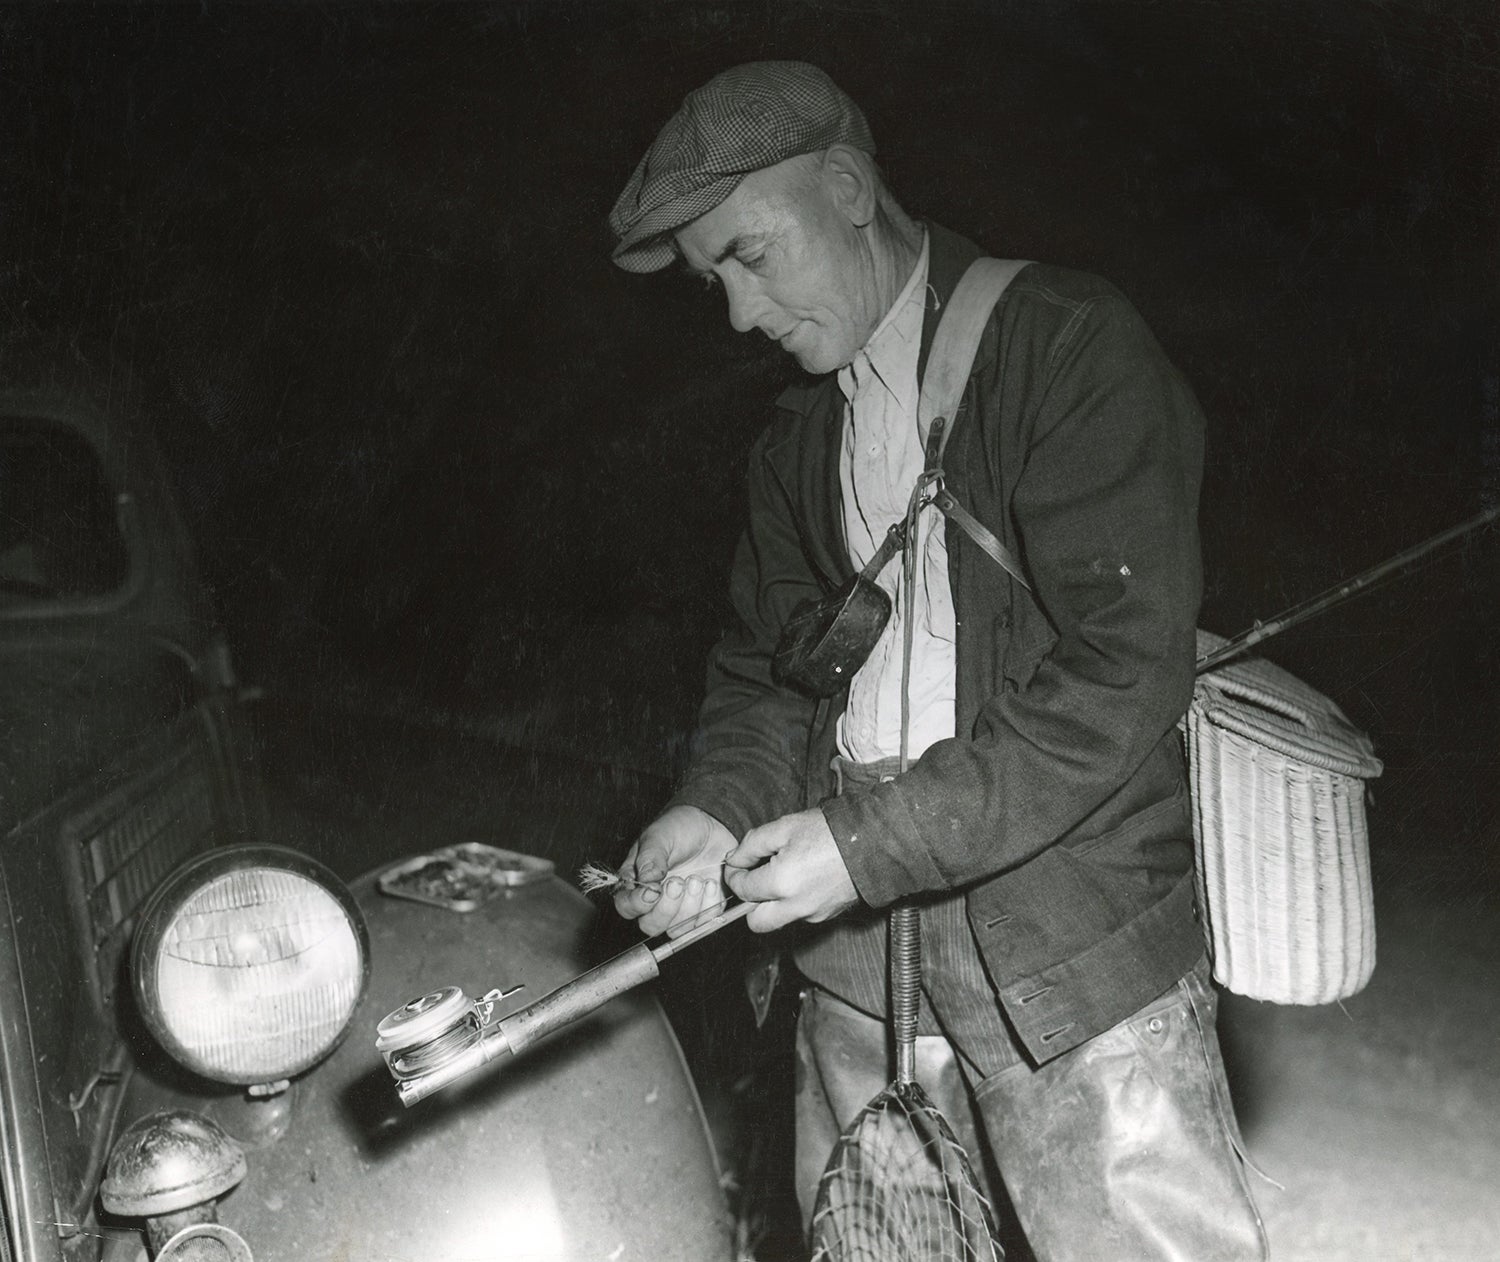 angler wearing wicker creel and holding fly rod ties a fly on his line using his car headlamp for light